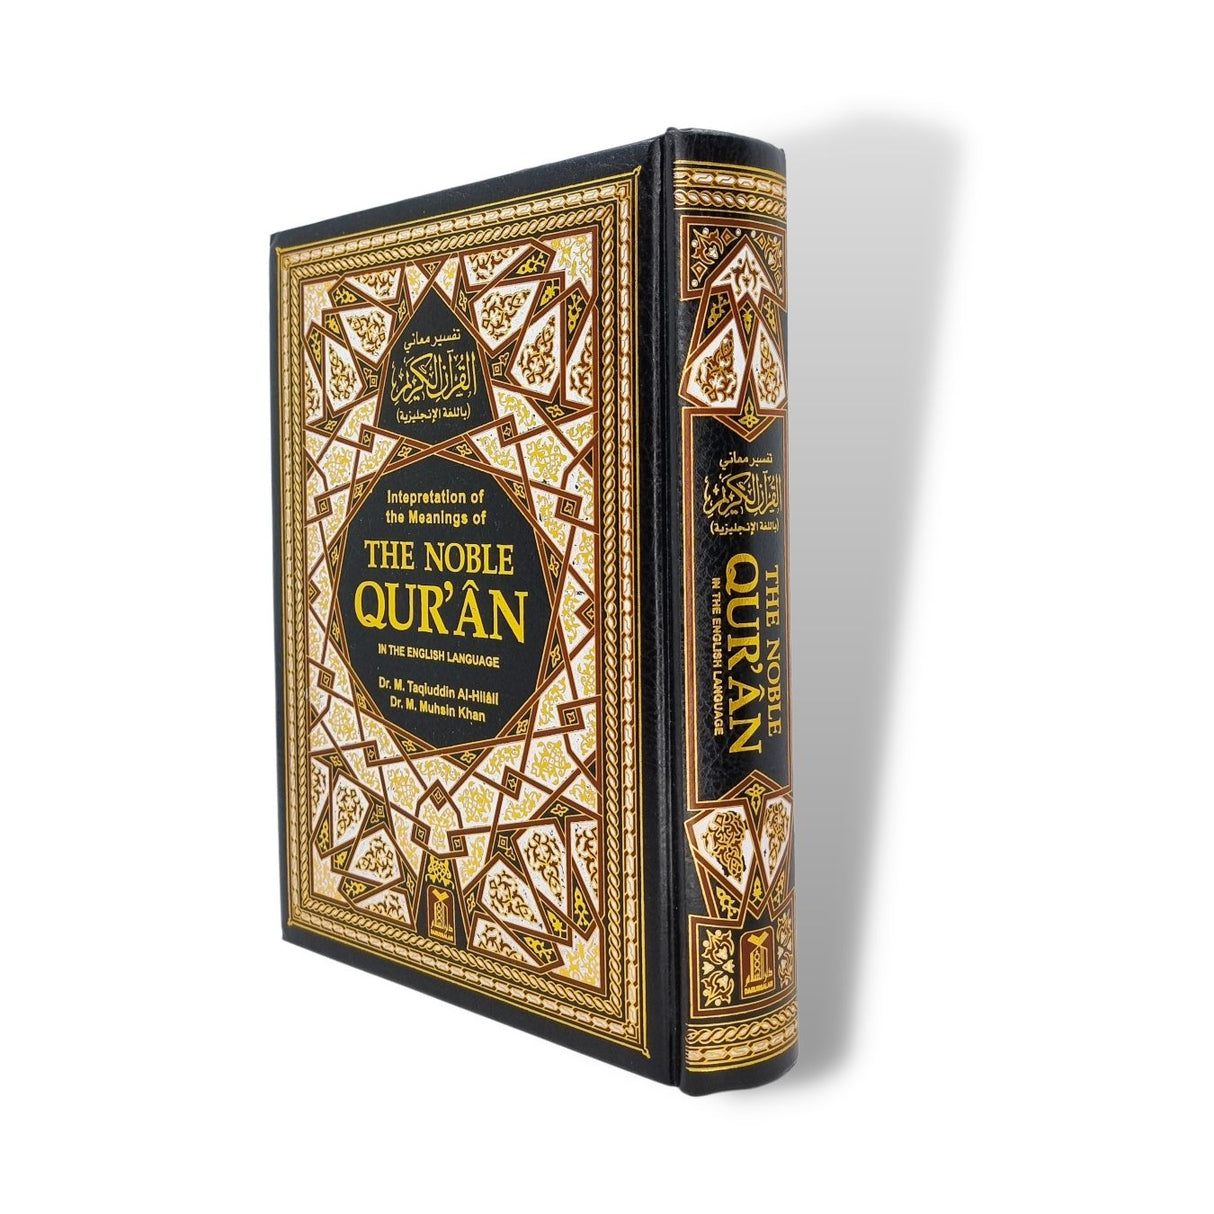 Deluxe Print - Interpretation of the Meanings of the Noble Quran in the English Language